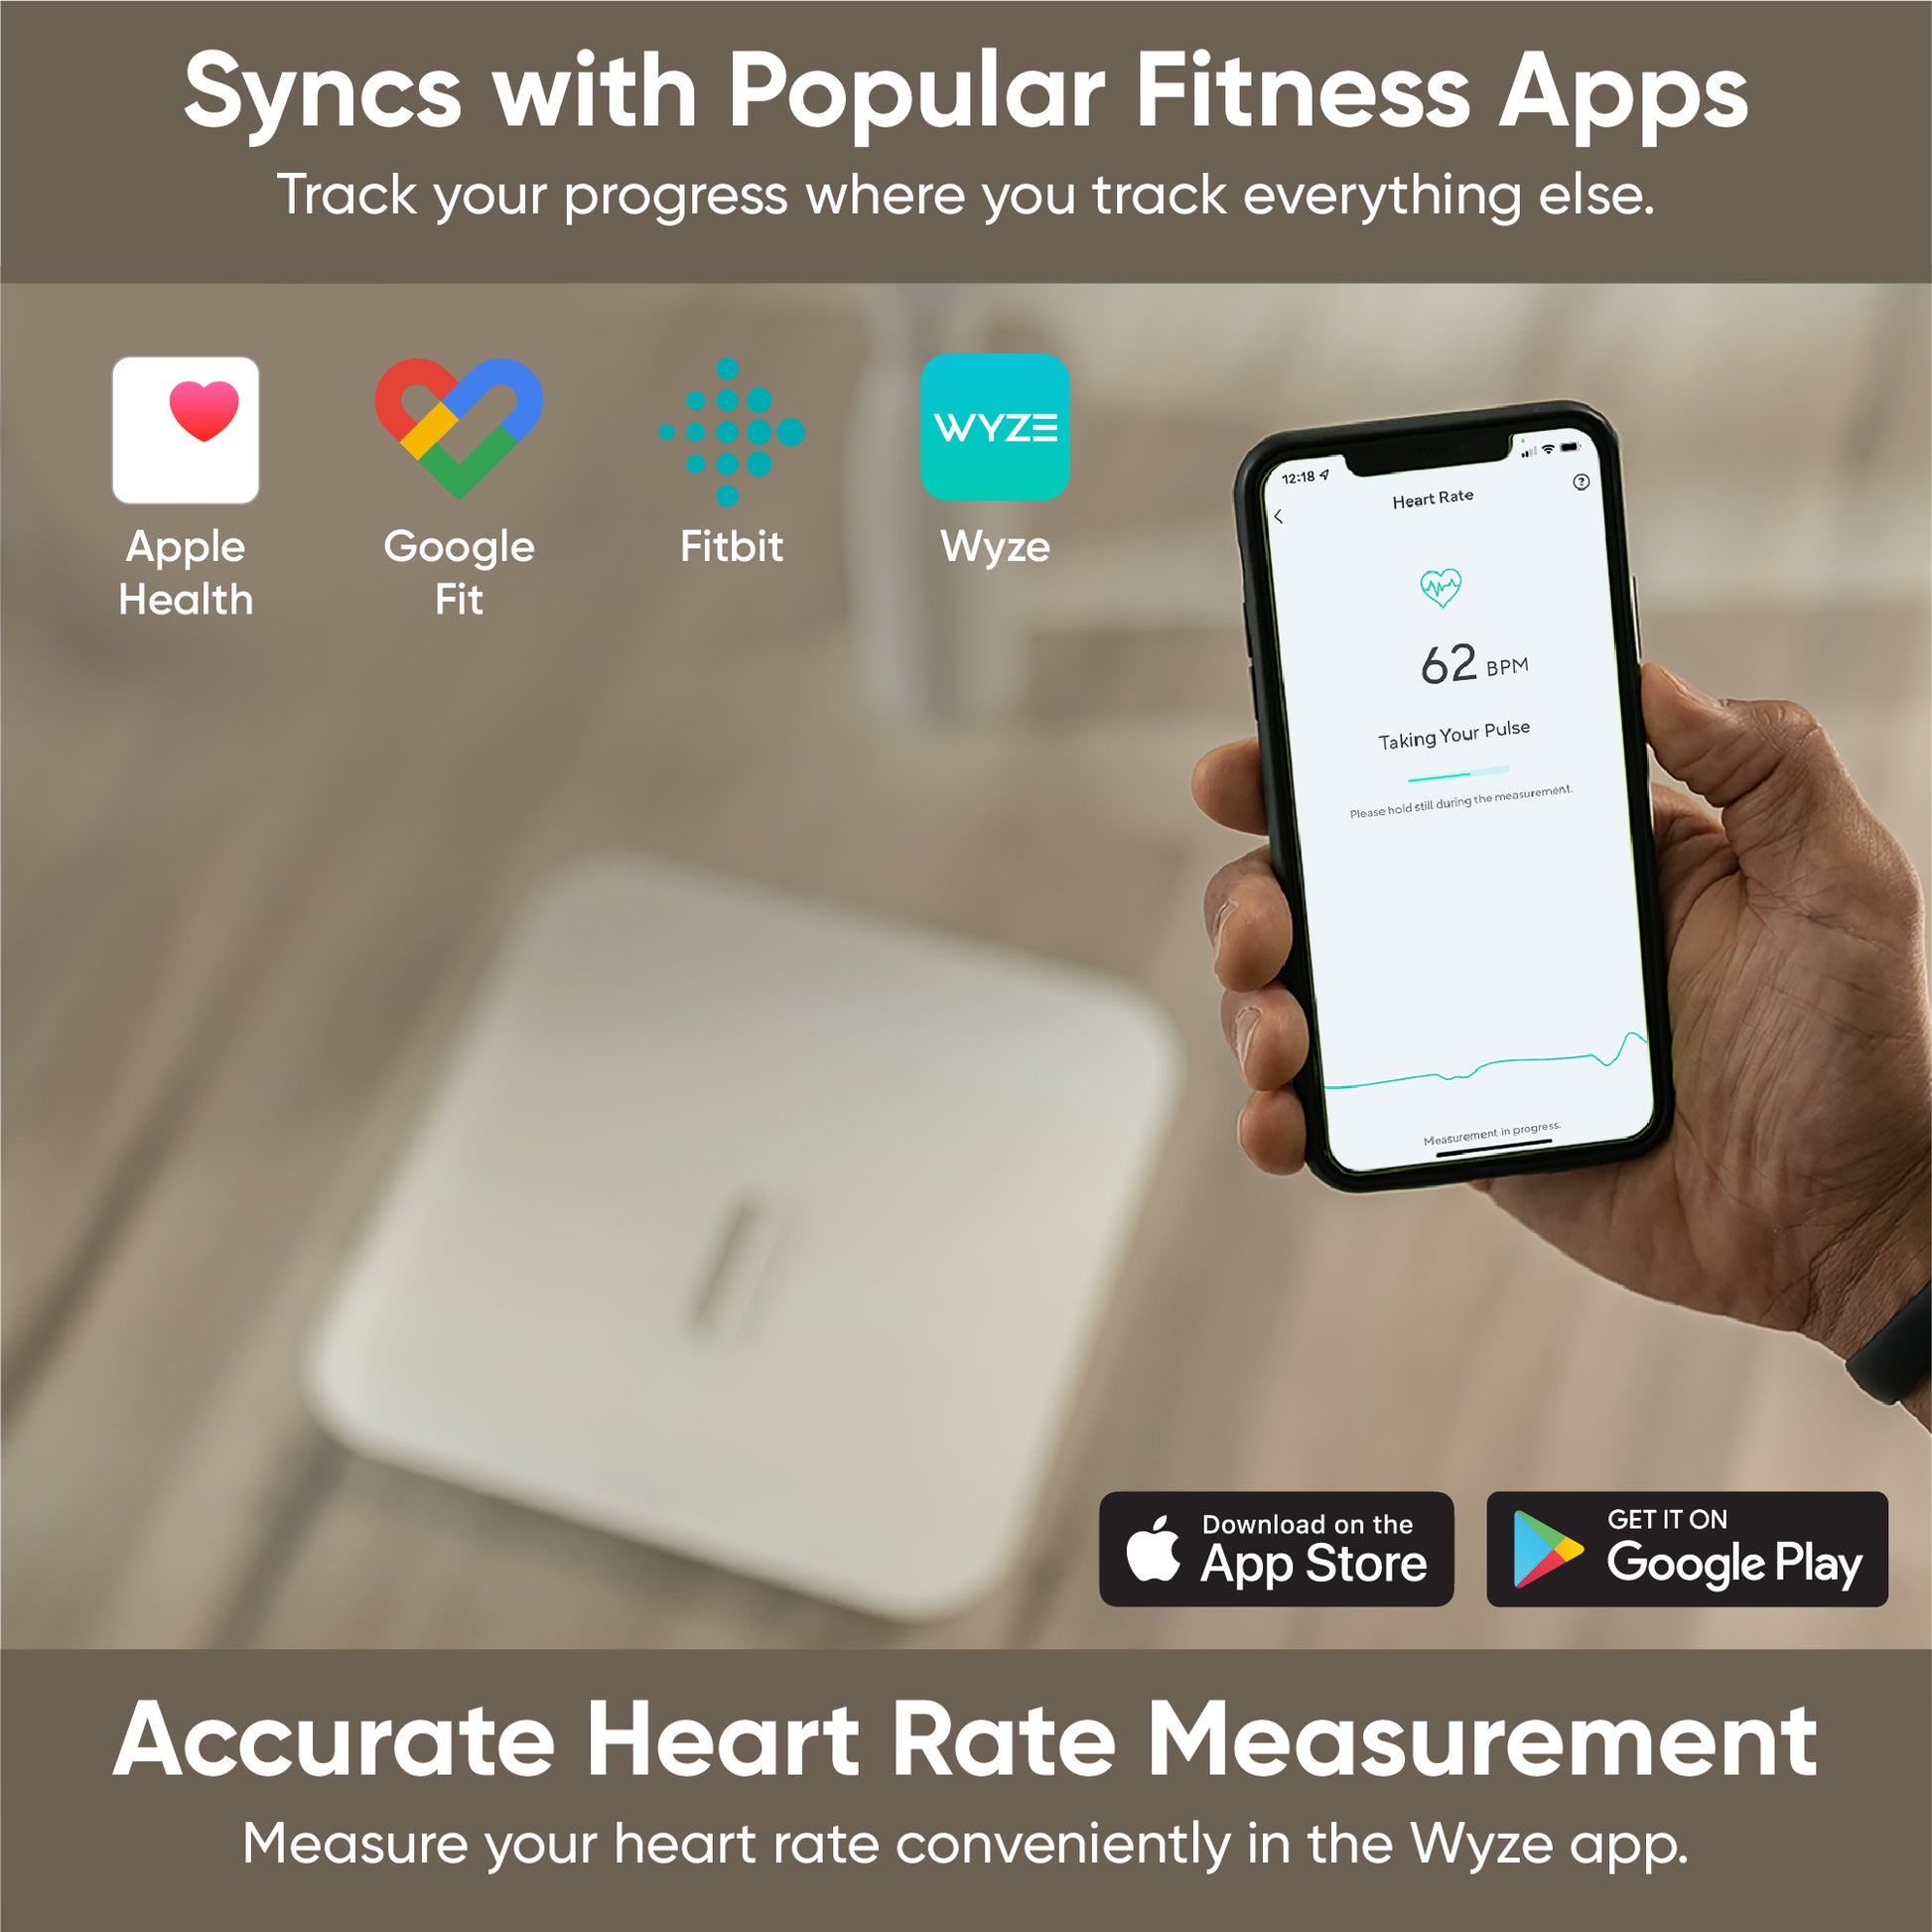 Person holding phone with Wyze app open on screen. Text overlay says "Syncs with popular fitness apps, apple health, google fit, Fitbit."